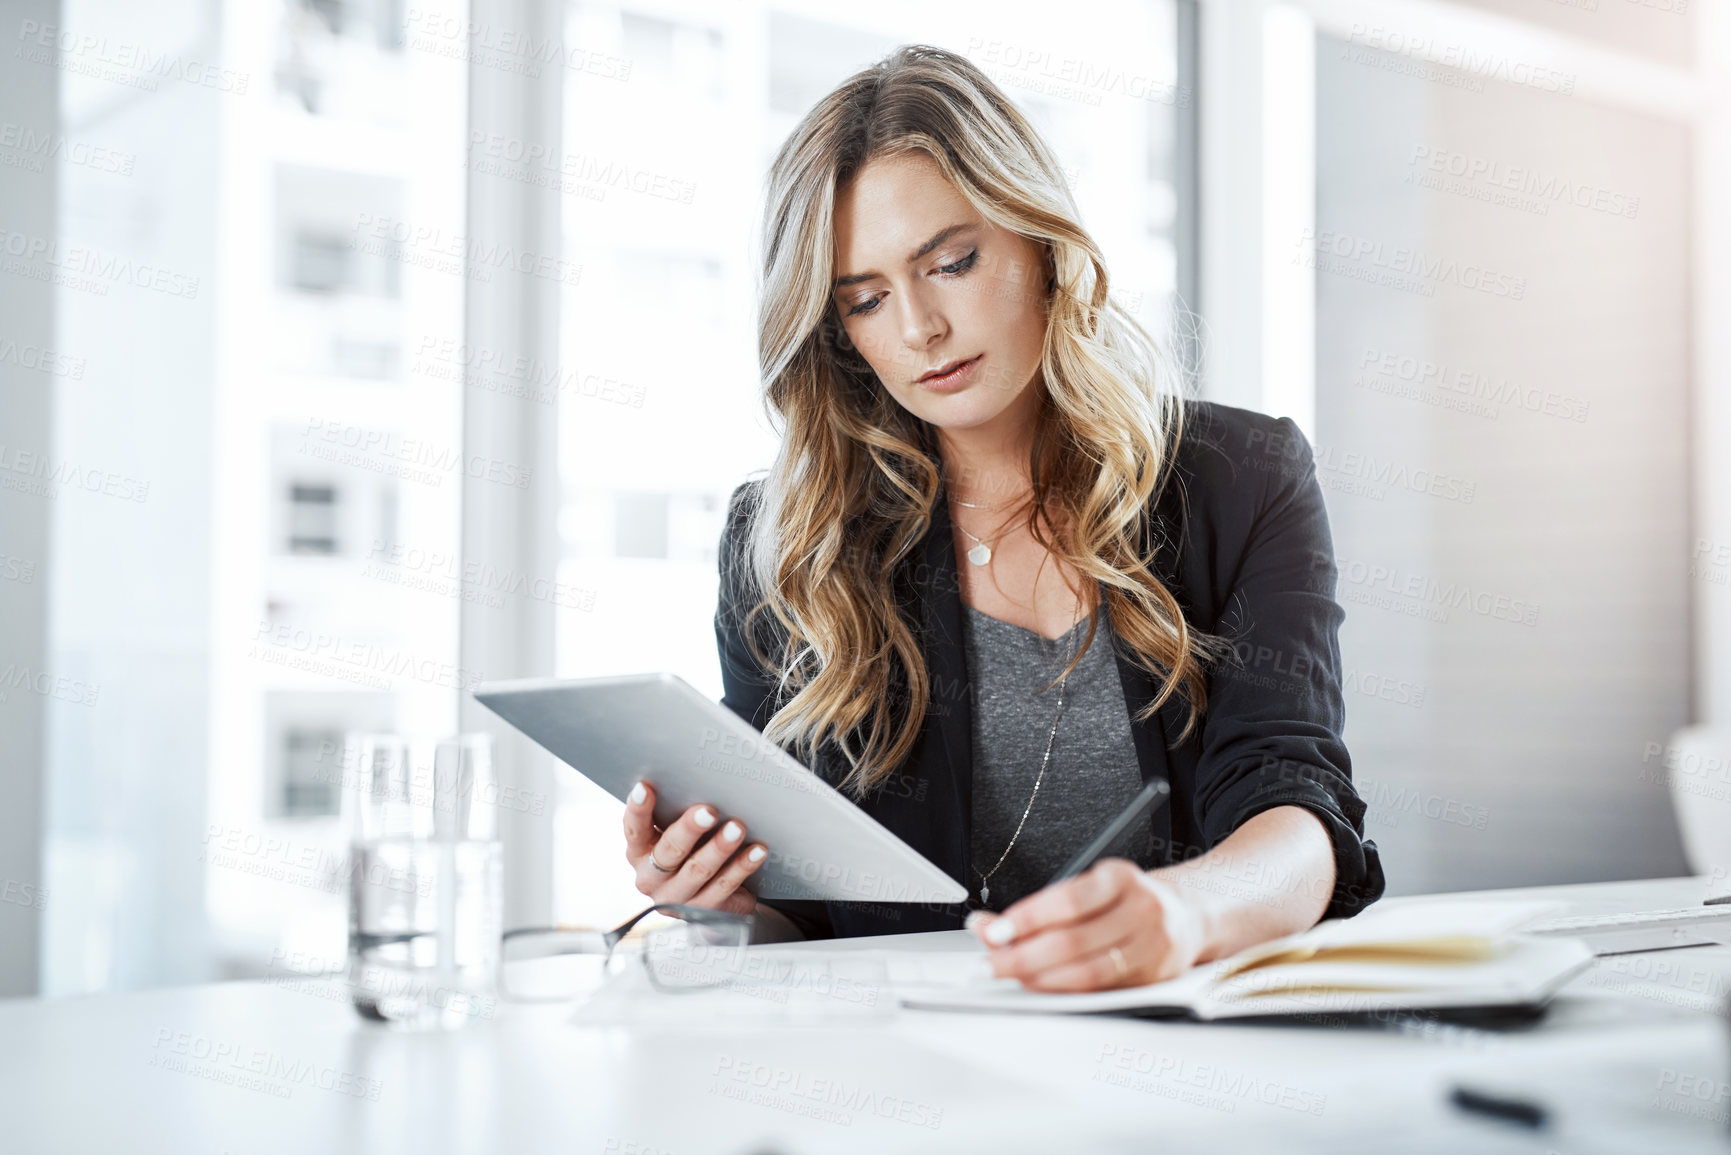 Buy stock photo Shot of a young businesswoman using a digital tablet and writing notes at her desk in a modern office